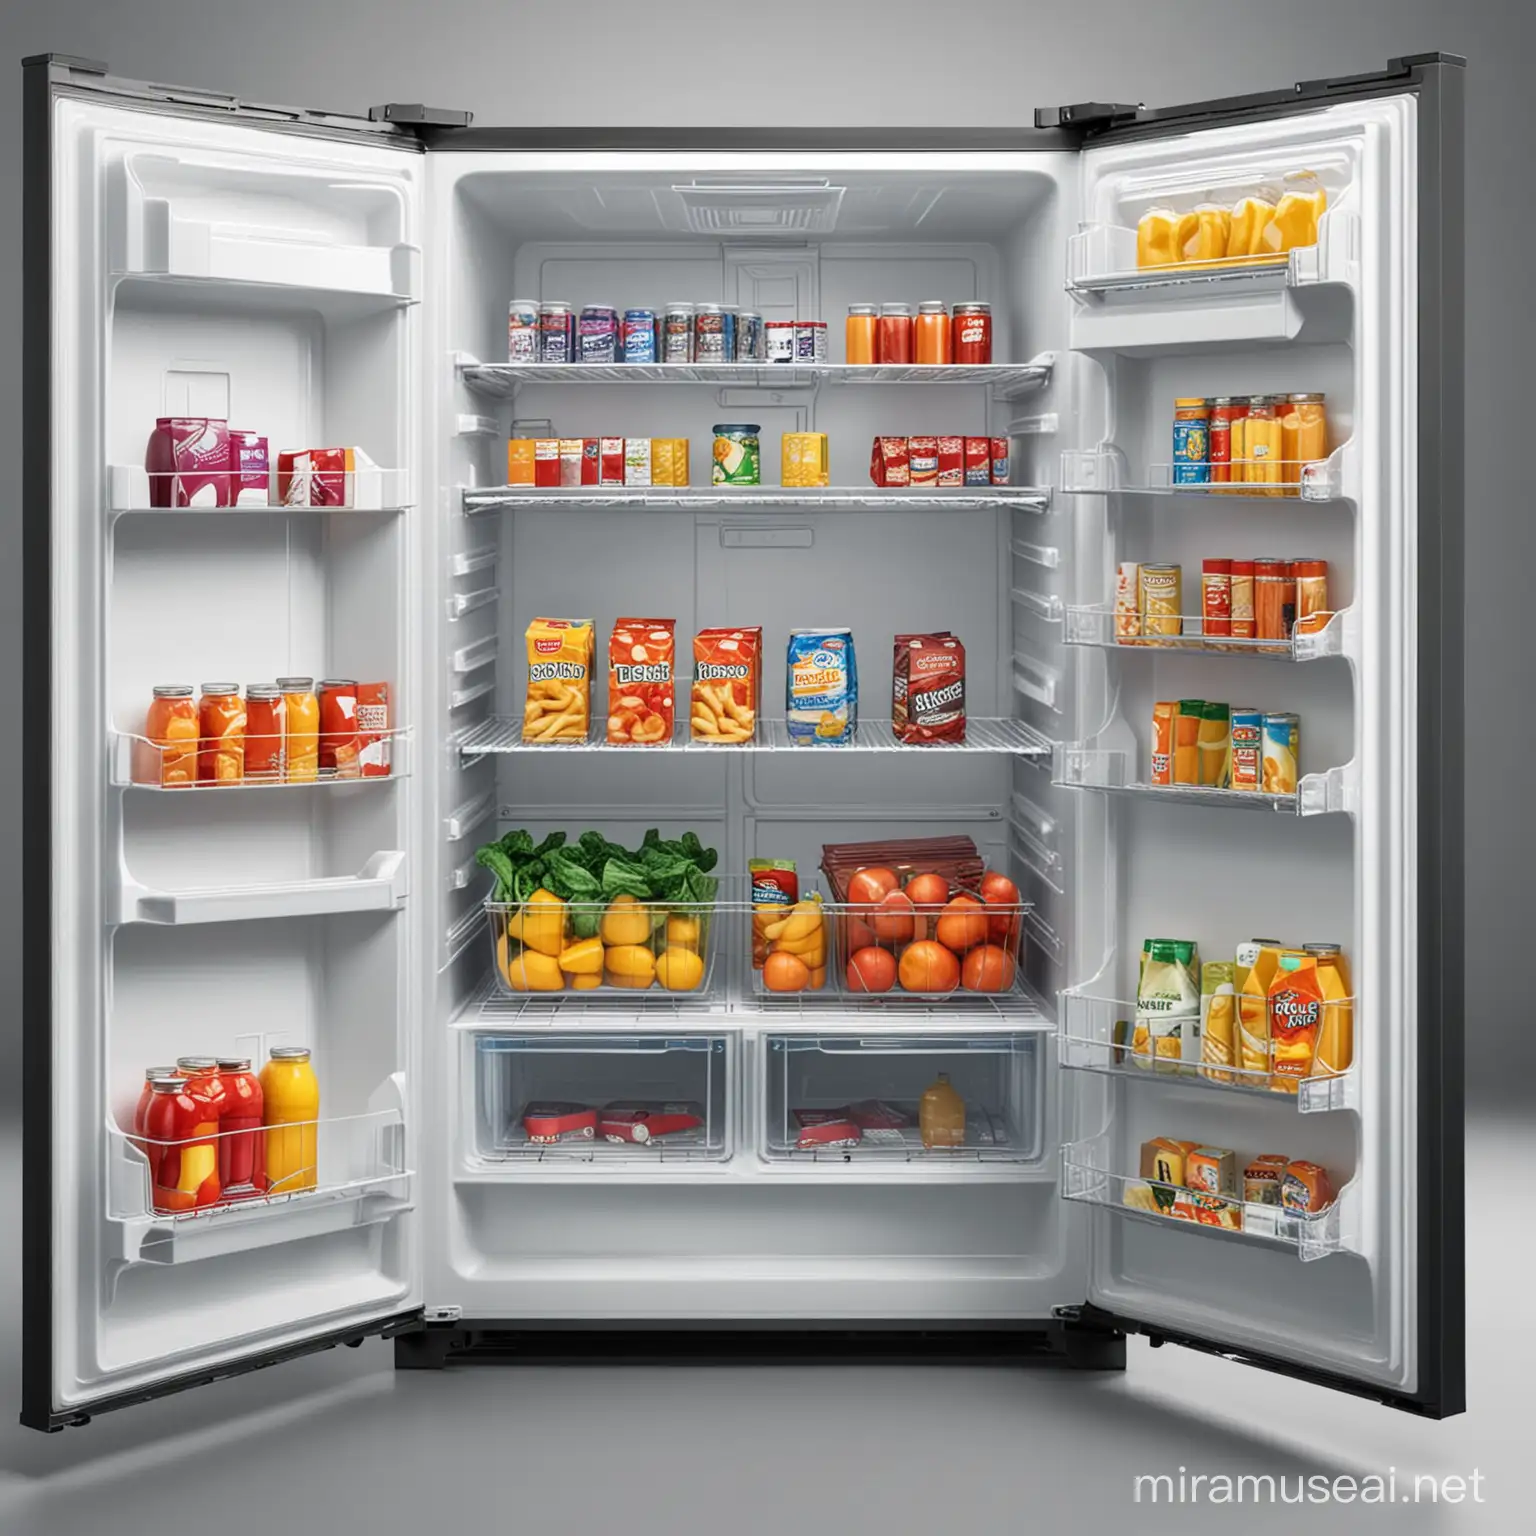 Kitchen Refrigerator Organized with Tetrisstyle Food Packages